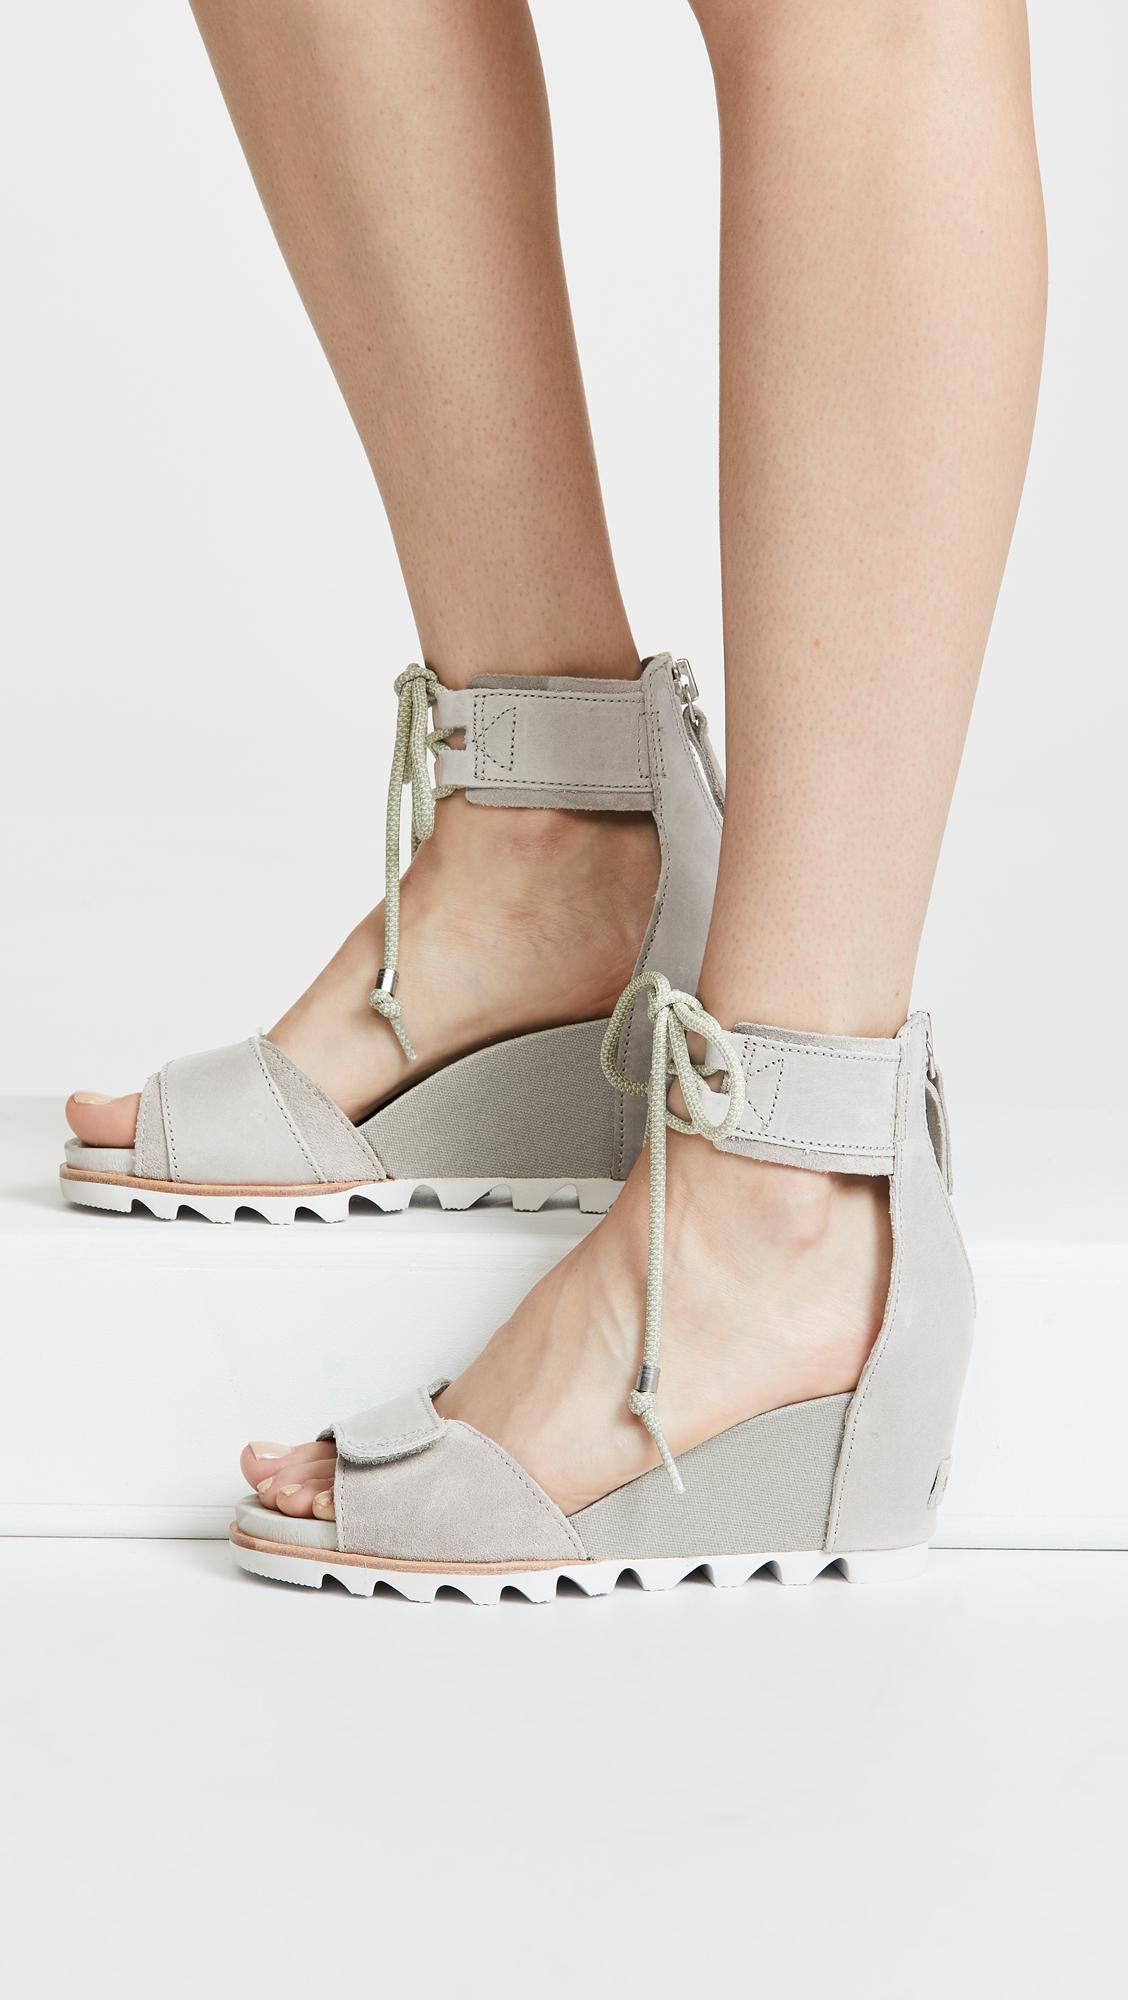 Sorel Joanie Ankle Lace Sandals - Lyst